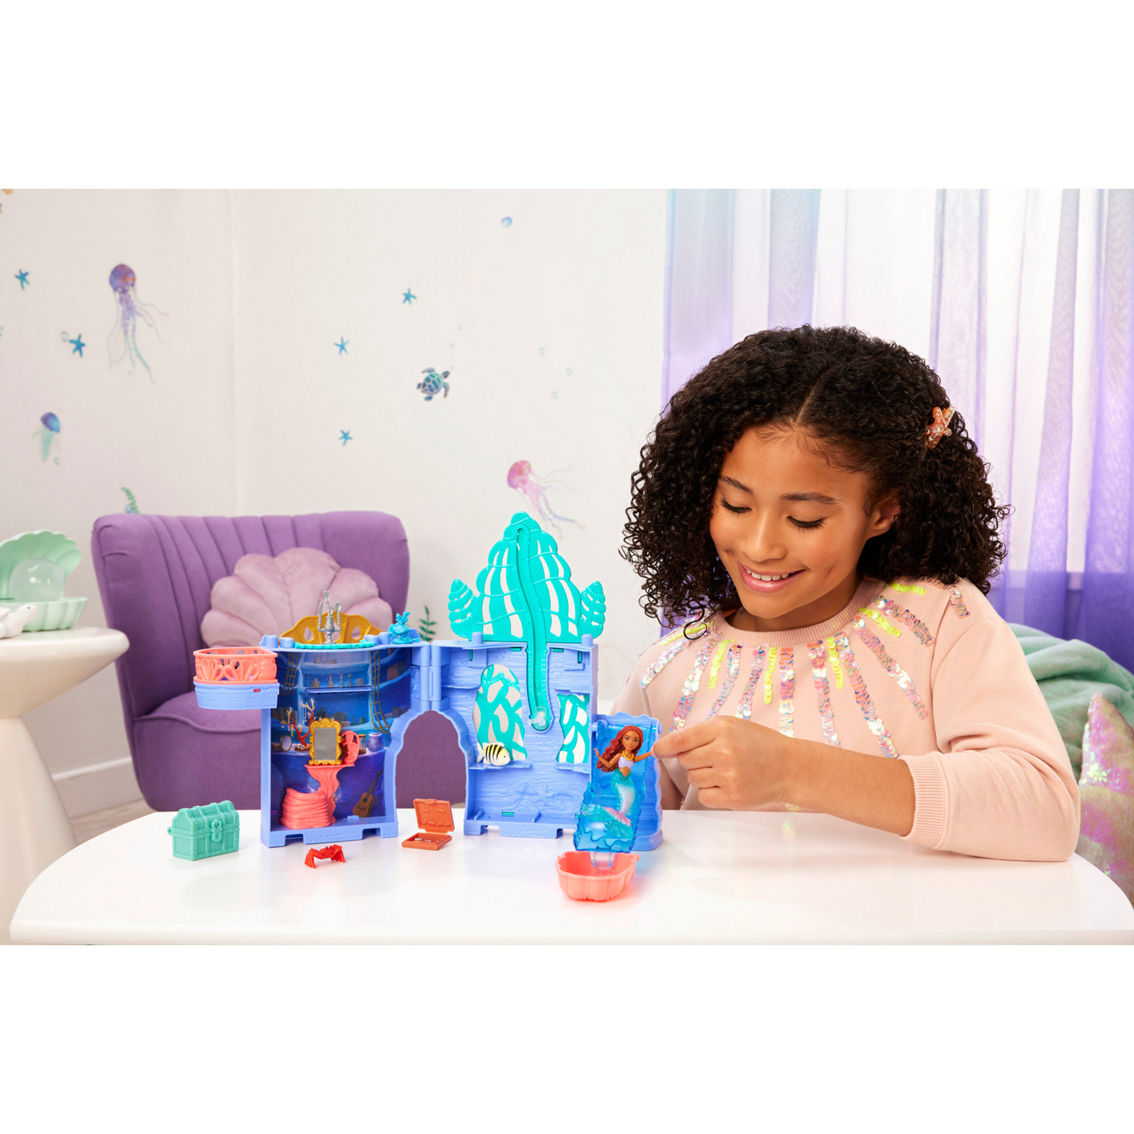 Disney Storytime Stackers The Little Mermaid Ariel's Grotto Small Playset - Image 8 of 10